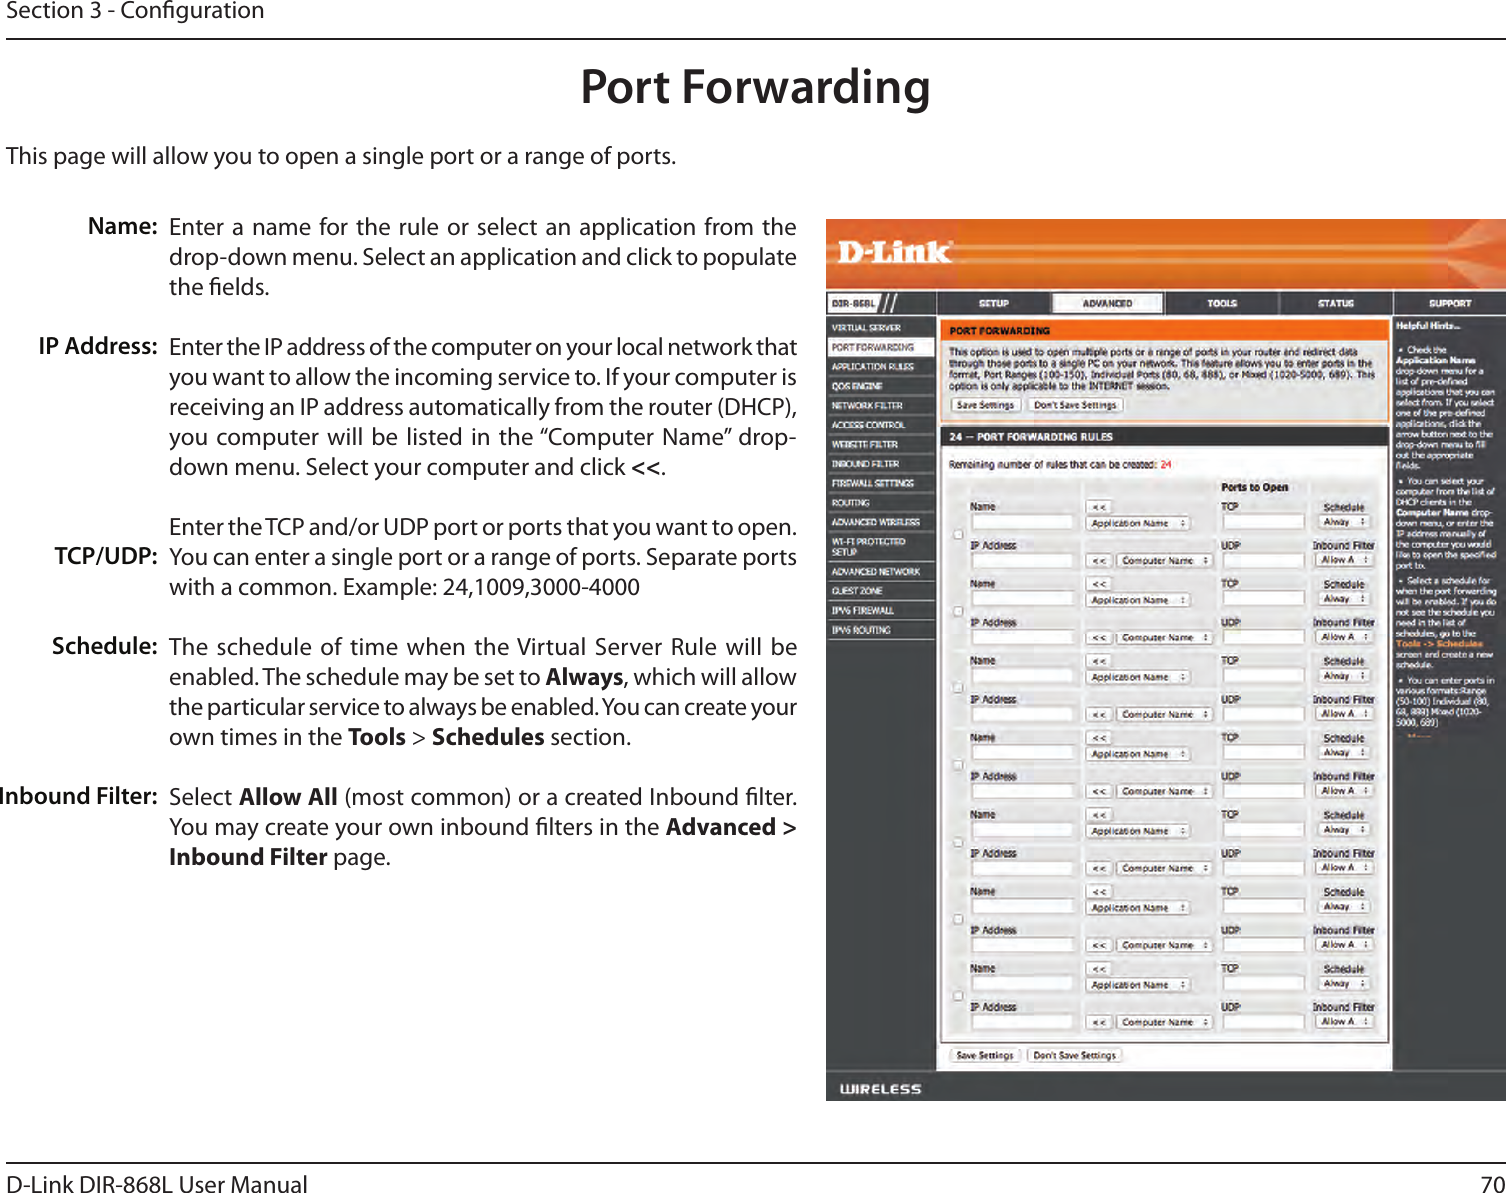 70D-Link DIR-868L User ManualSection 3 - CongurationThis page will allow you to open a single port or a range of ports.Port ForwardingEnter a name  for the rule or select  an application from the drop-down menu. Select an application and click to populate the elds.Enter the IP address of the computer on your local network that you want to allow the incoming service to. If your computer is receiving an IP address automatically from the router (DHCP), you computer will be  listed in the “Computer Name”  drop-down menu. Select your computer and click &lt;&lt;. Enter the TCP and/or UDP port or ports that you want to open. You can enter a single port or a range of ports. Separate ports with a common. Example: 24,1009,3000-4000The schedule of  time when the Virtual Server Rule will be enabled. The schedule may be set to Always, which will allow the particular service to always be enabled. You can create your own times in the Tools &gt; Schedules section.Select Allow All (most common) or a created Inbound lter. You may create your own inbound lters in the Advanced &gt; Inbound Filter page.Name:IP Address:TCP/UDP:Schedule:Inbound Filter: